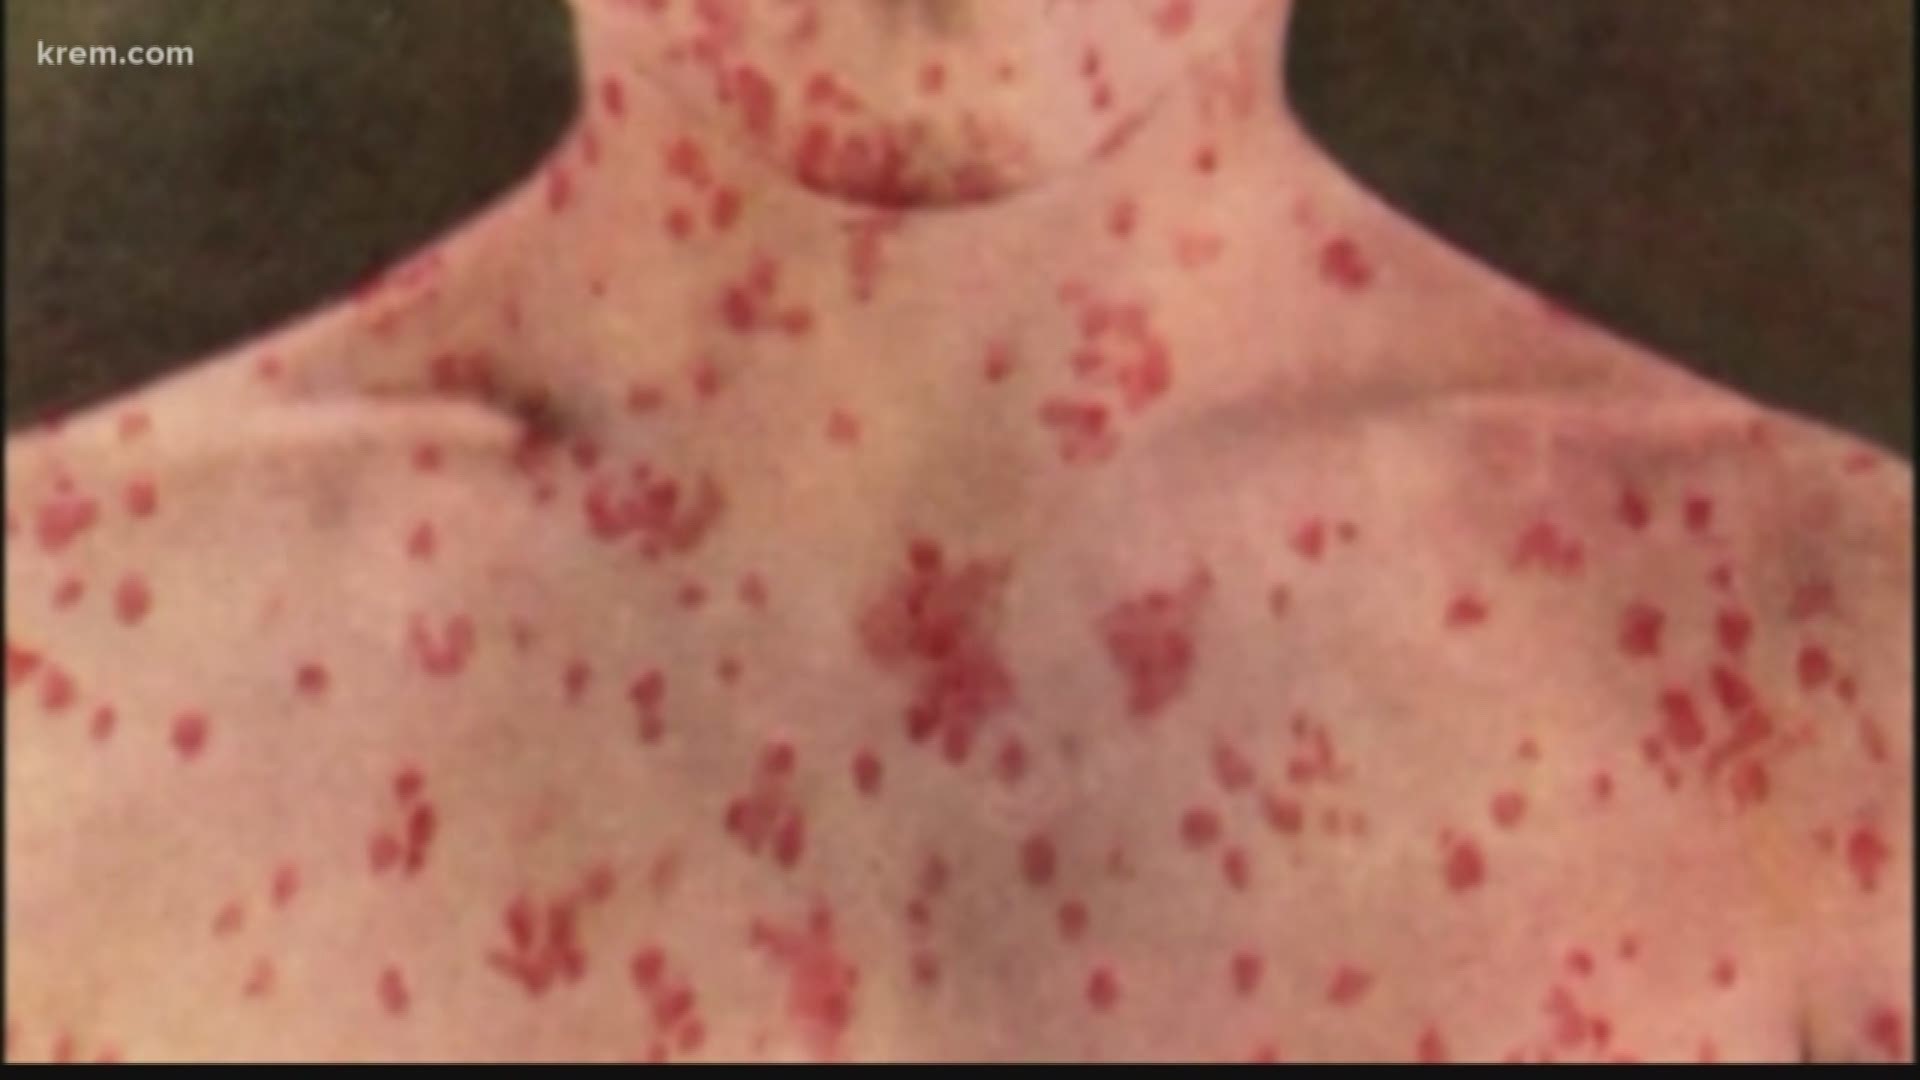 We wanted to know, why is Washington seeing a measles outbreak? And are other states seeing the same trend?